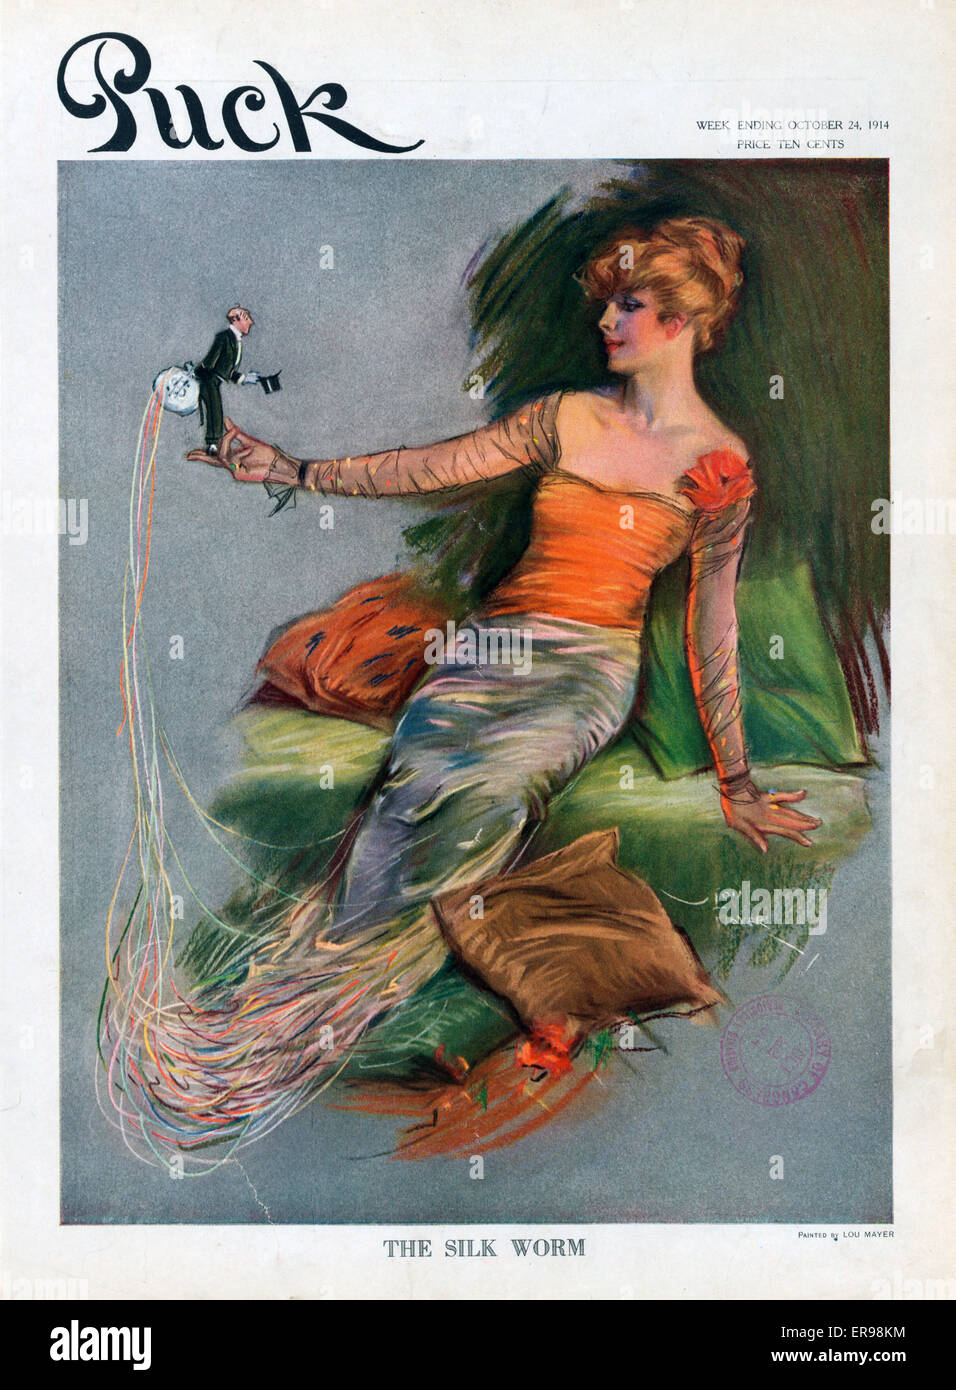 The silk worm. Illustration shows a beautiful young woman reclining on cushions and holding on the tips of her fingers a diminutive man, well-dressed and holding a large moneybag from which many silk strings extend to and form the bottom of her dress. It Stock Photo